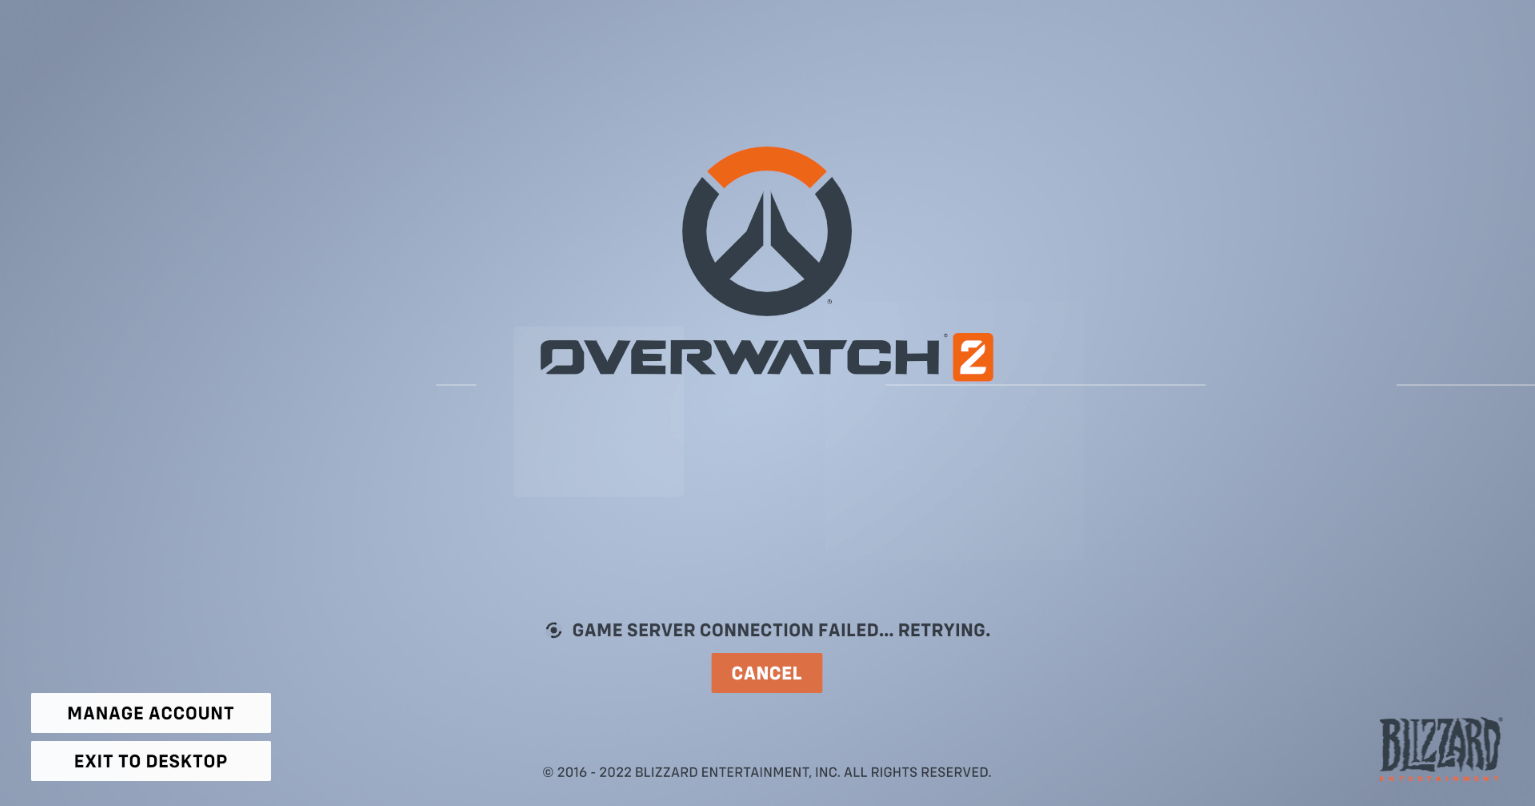 Overwatch 2 Game Server Connection Failed: How to Fix?